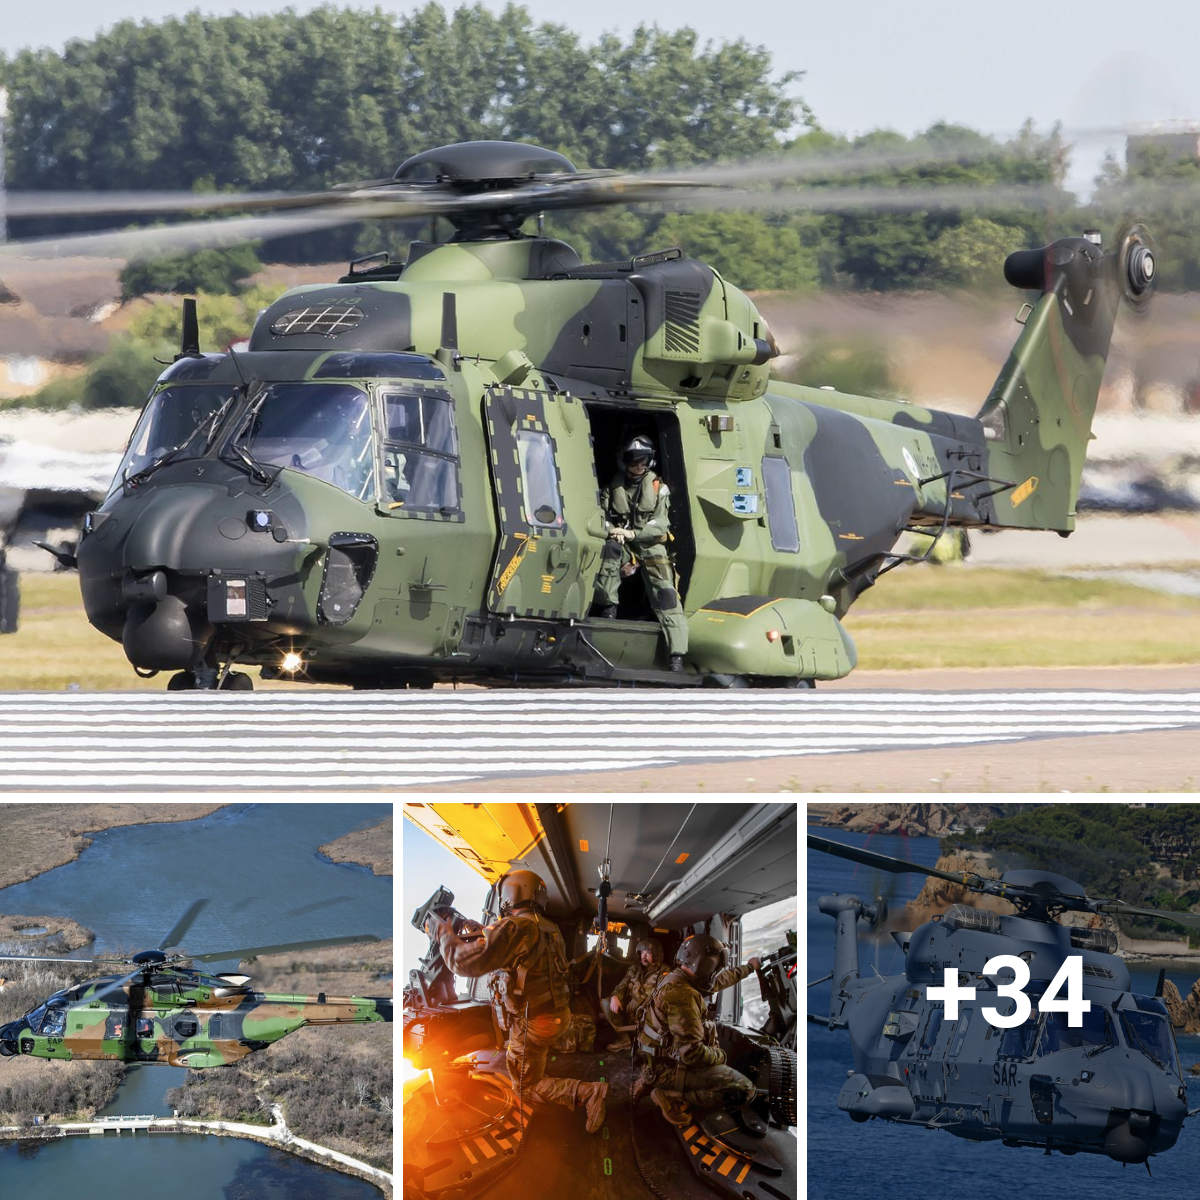 The improved NH90 helicopter fleet has strengthened the capability of Spain’s armed forces.